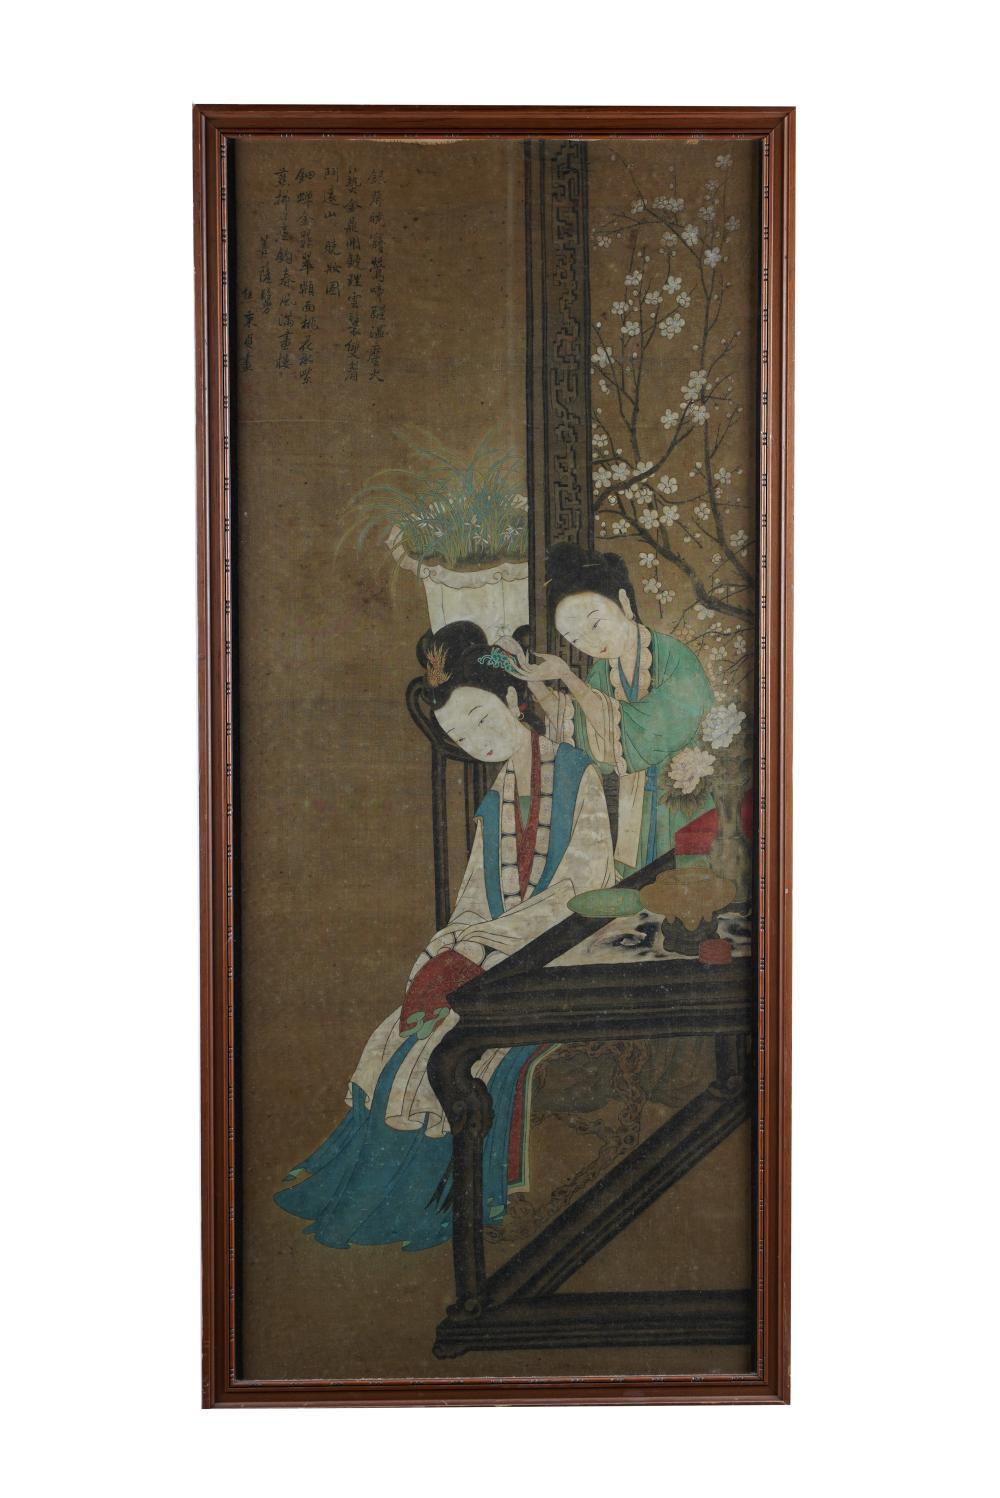 FRAMED CHINESE SCROLL PAINTINGCondition: